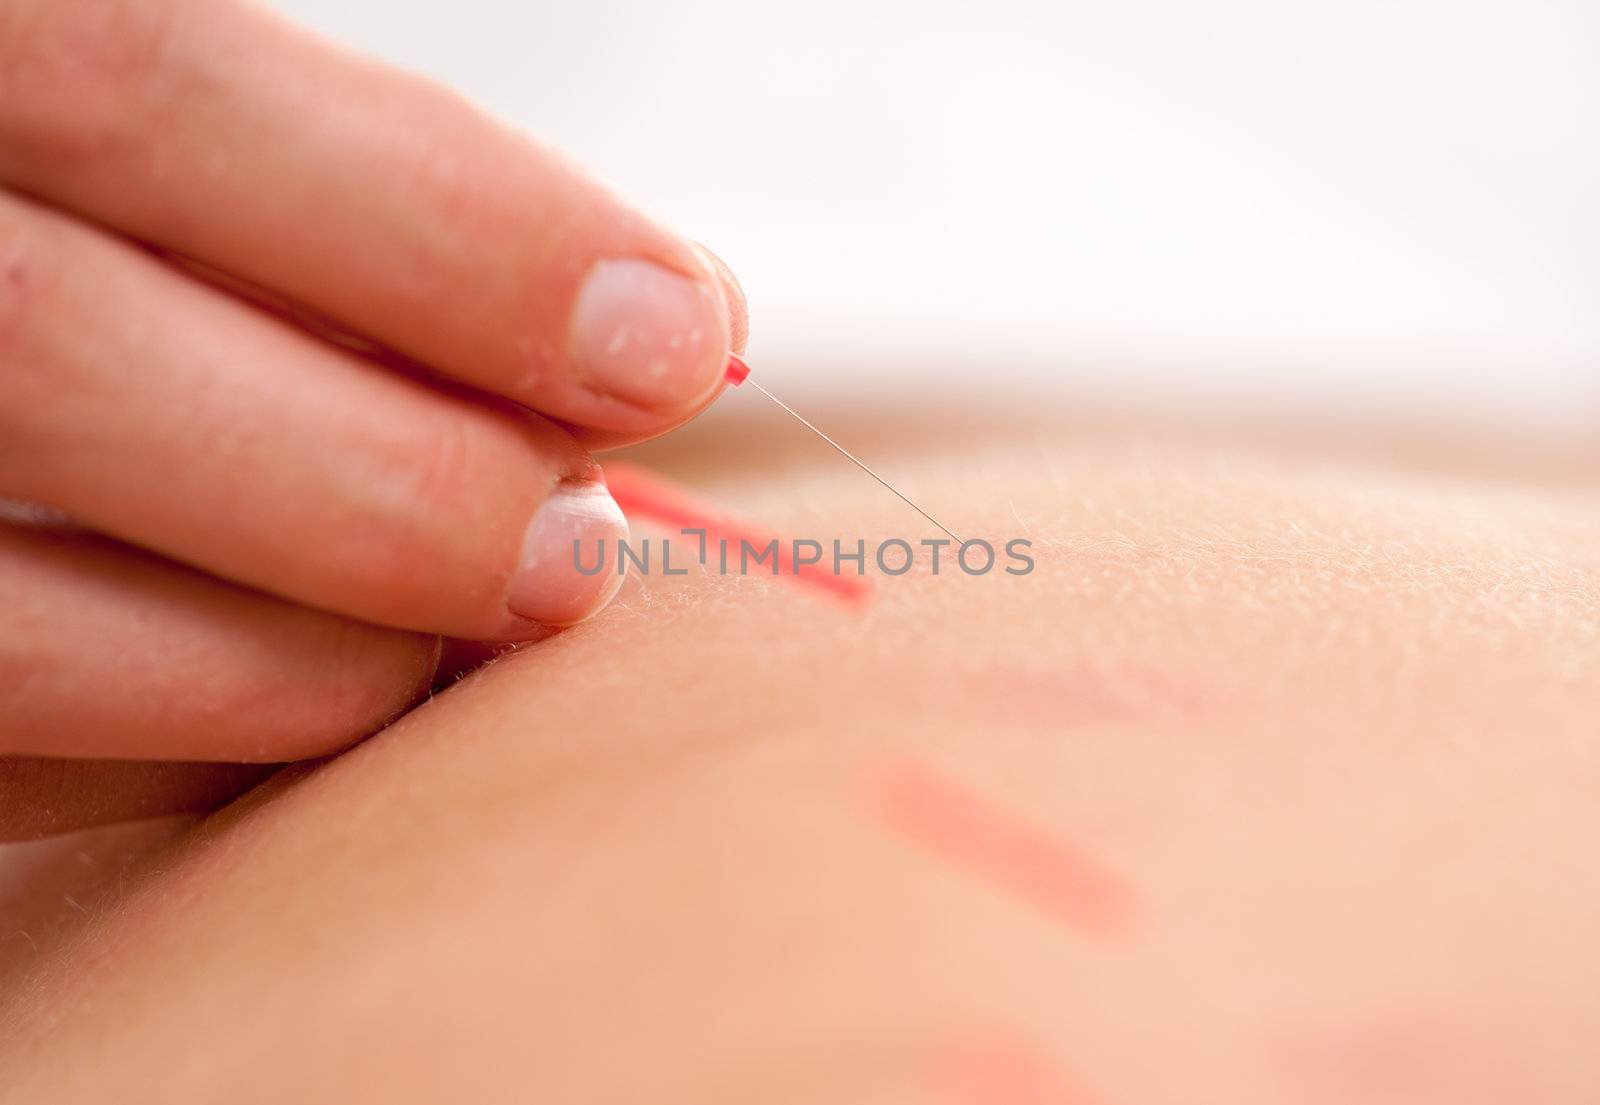 Macro detail of a hand stimulating an acupuncture needle in the back